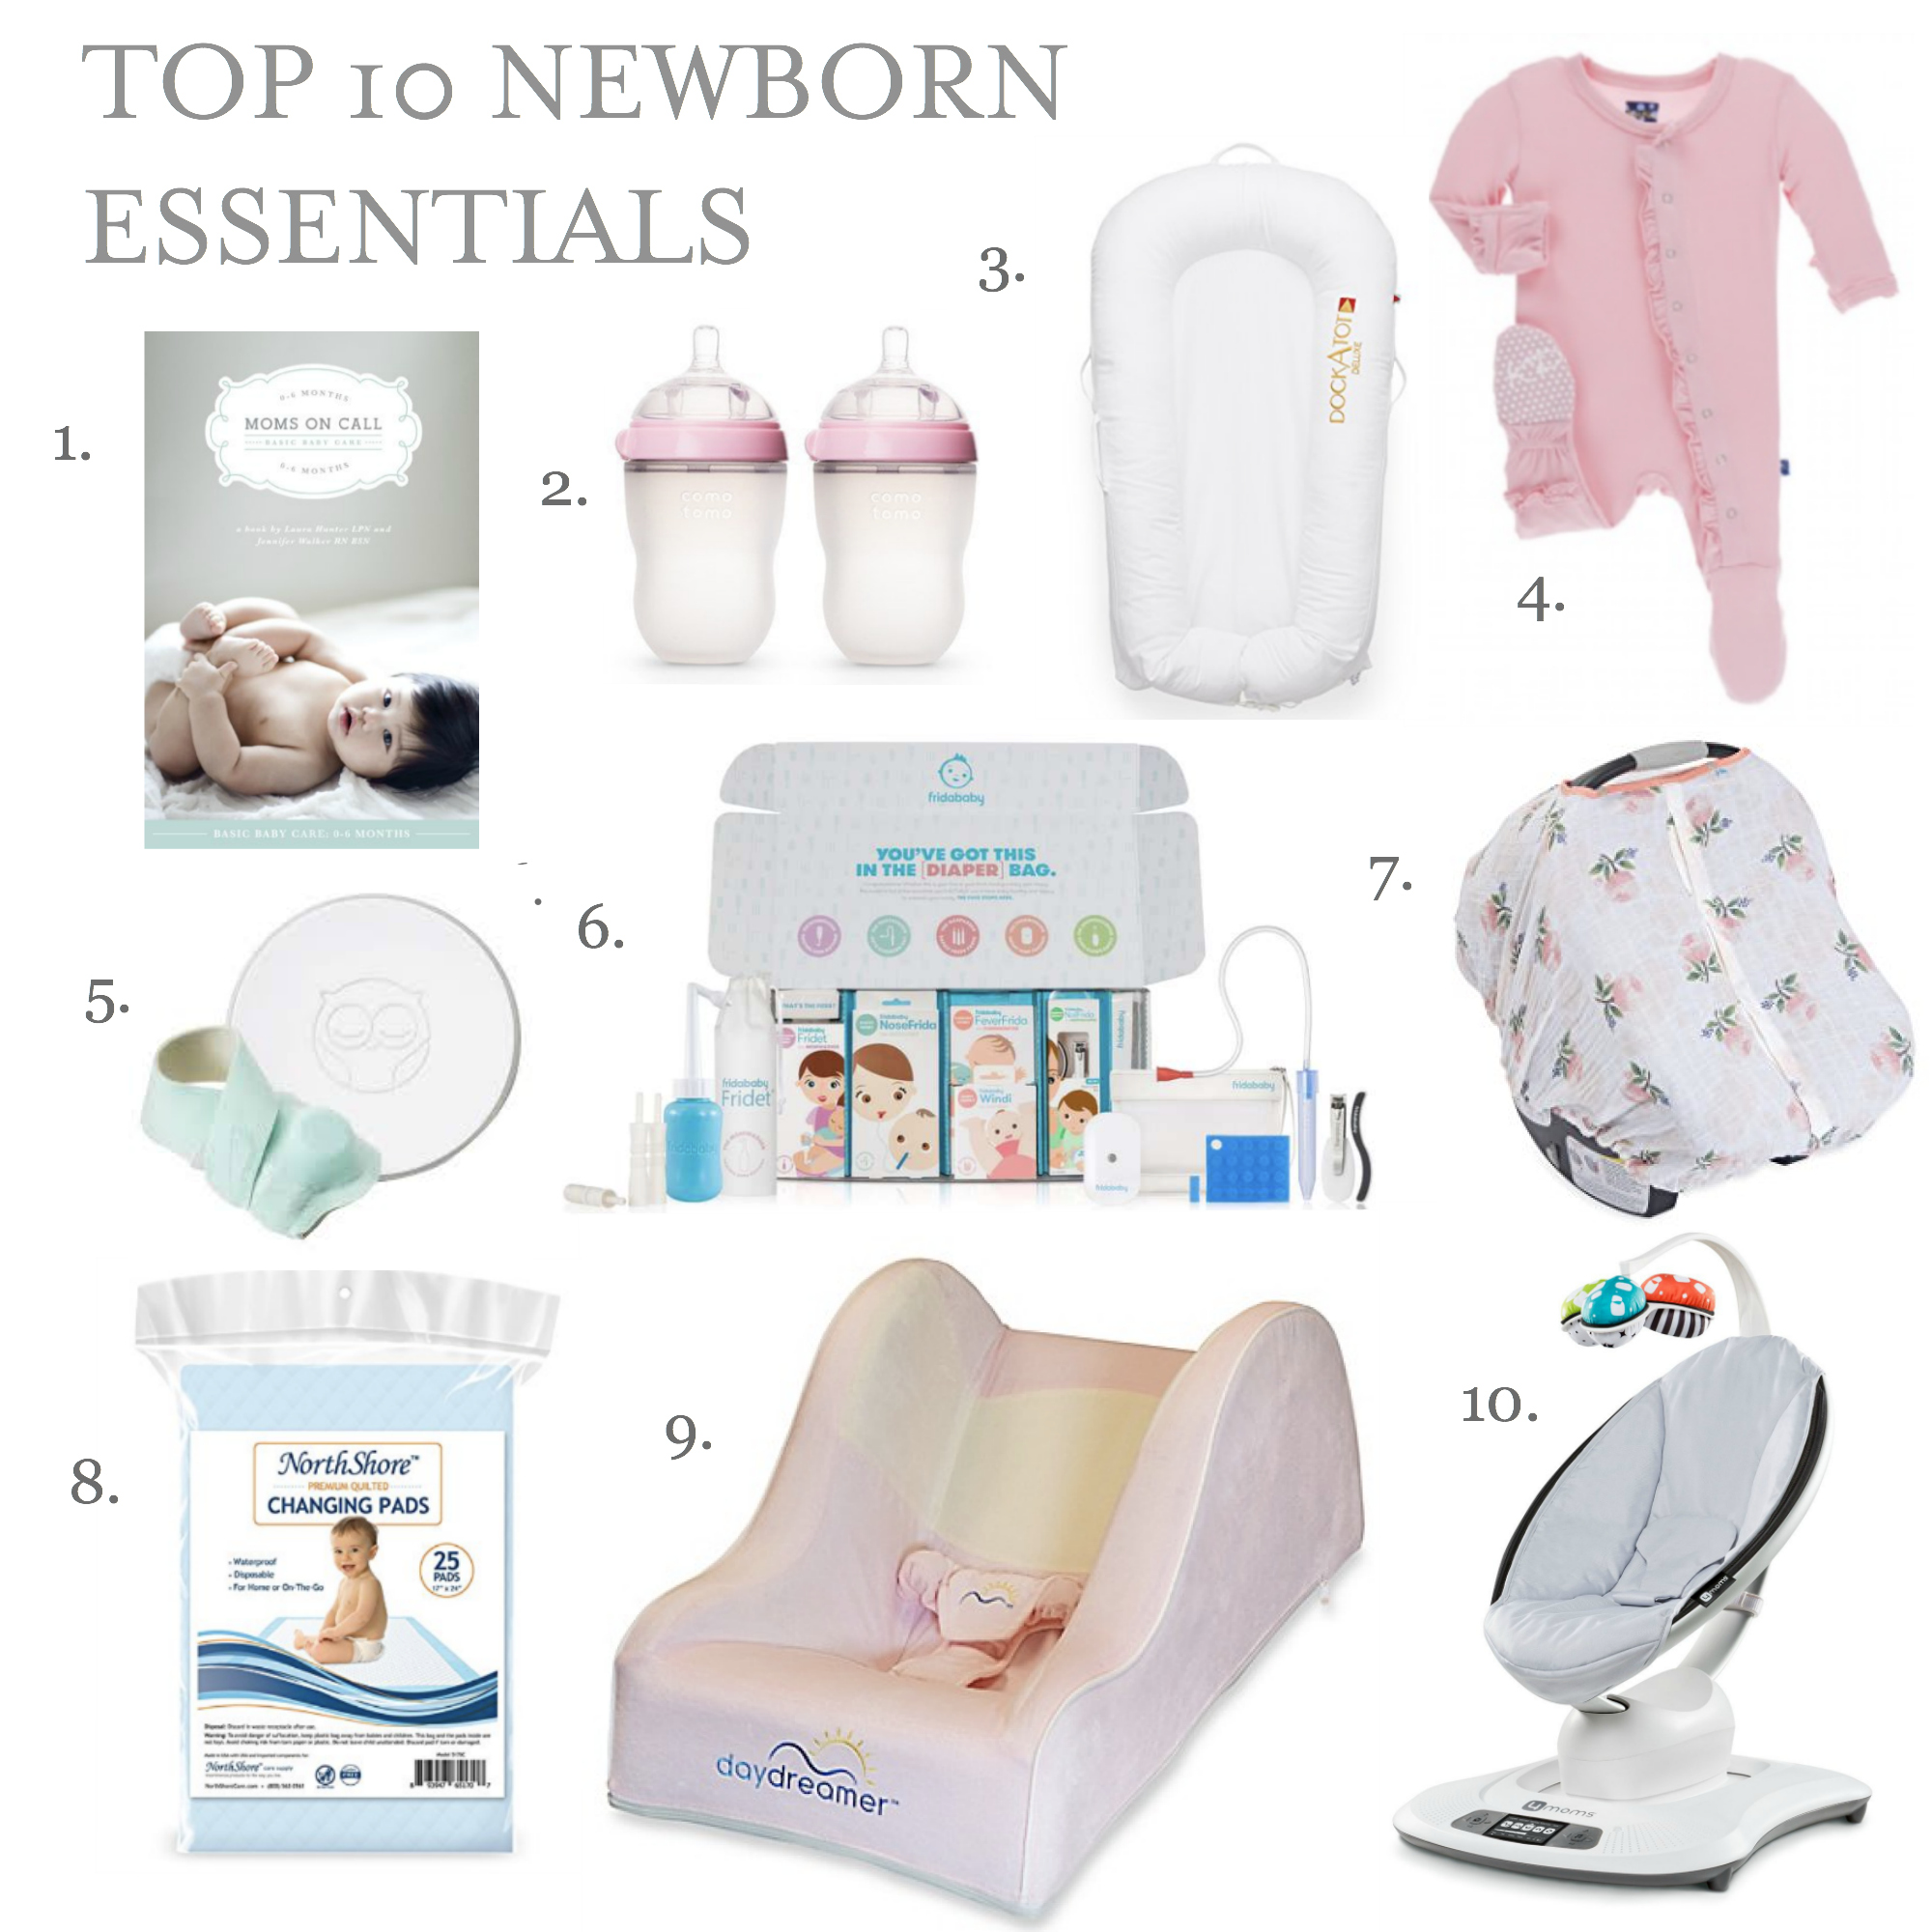 things needed for newborn baby in hospital